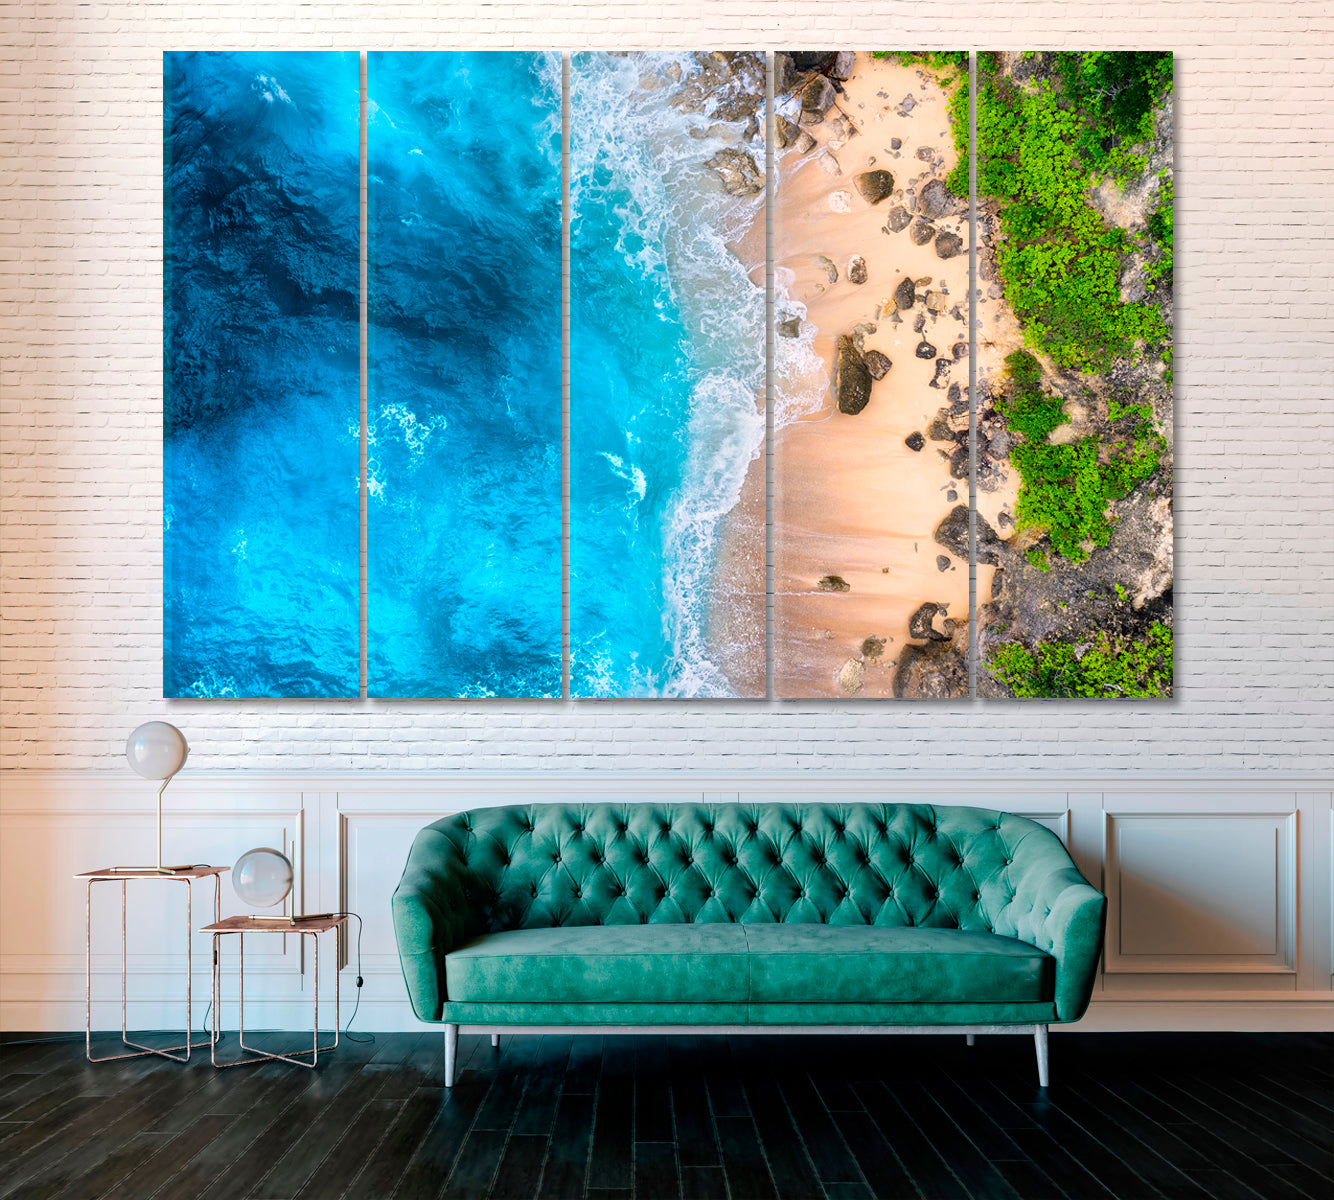 Turquoise Ocean Waves Bali Island Canvas Print ArtLexy 5 Panels 36"x24" inches 